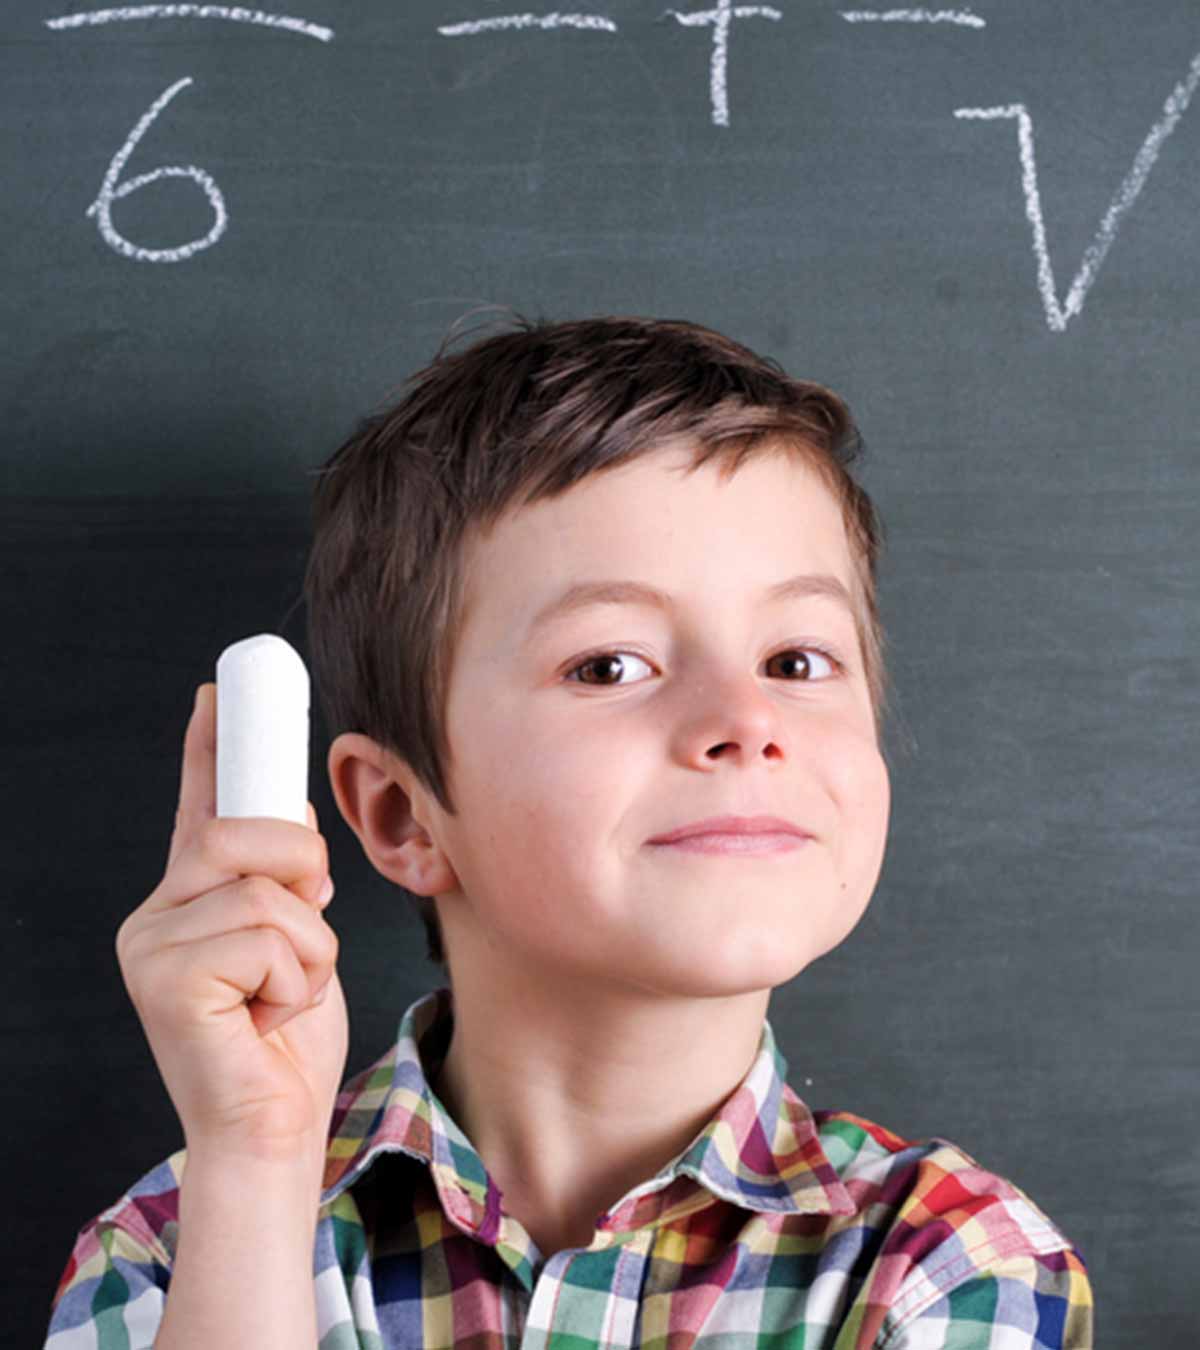 20 Easy Math Tricks For Kids To Improve Analytical Skills